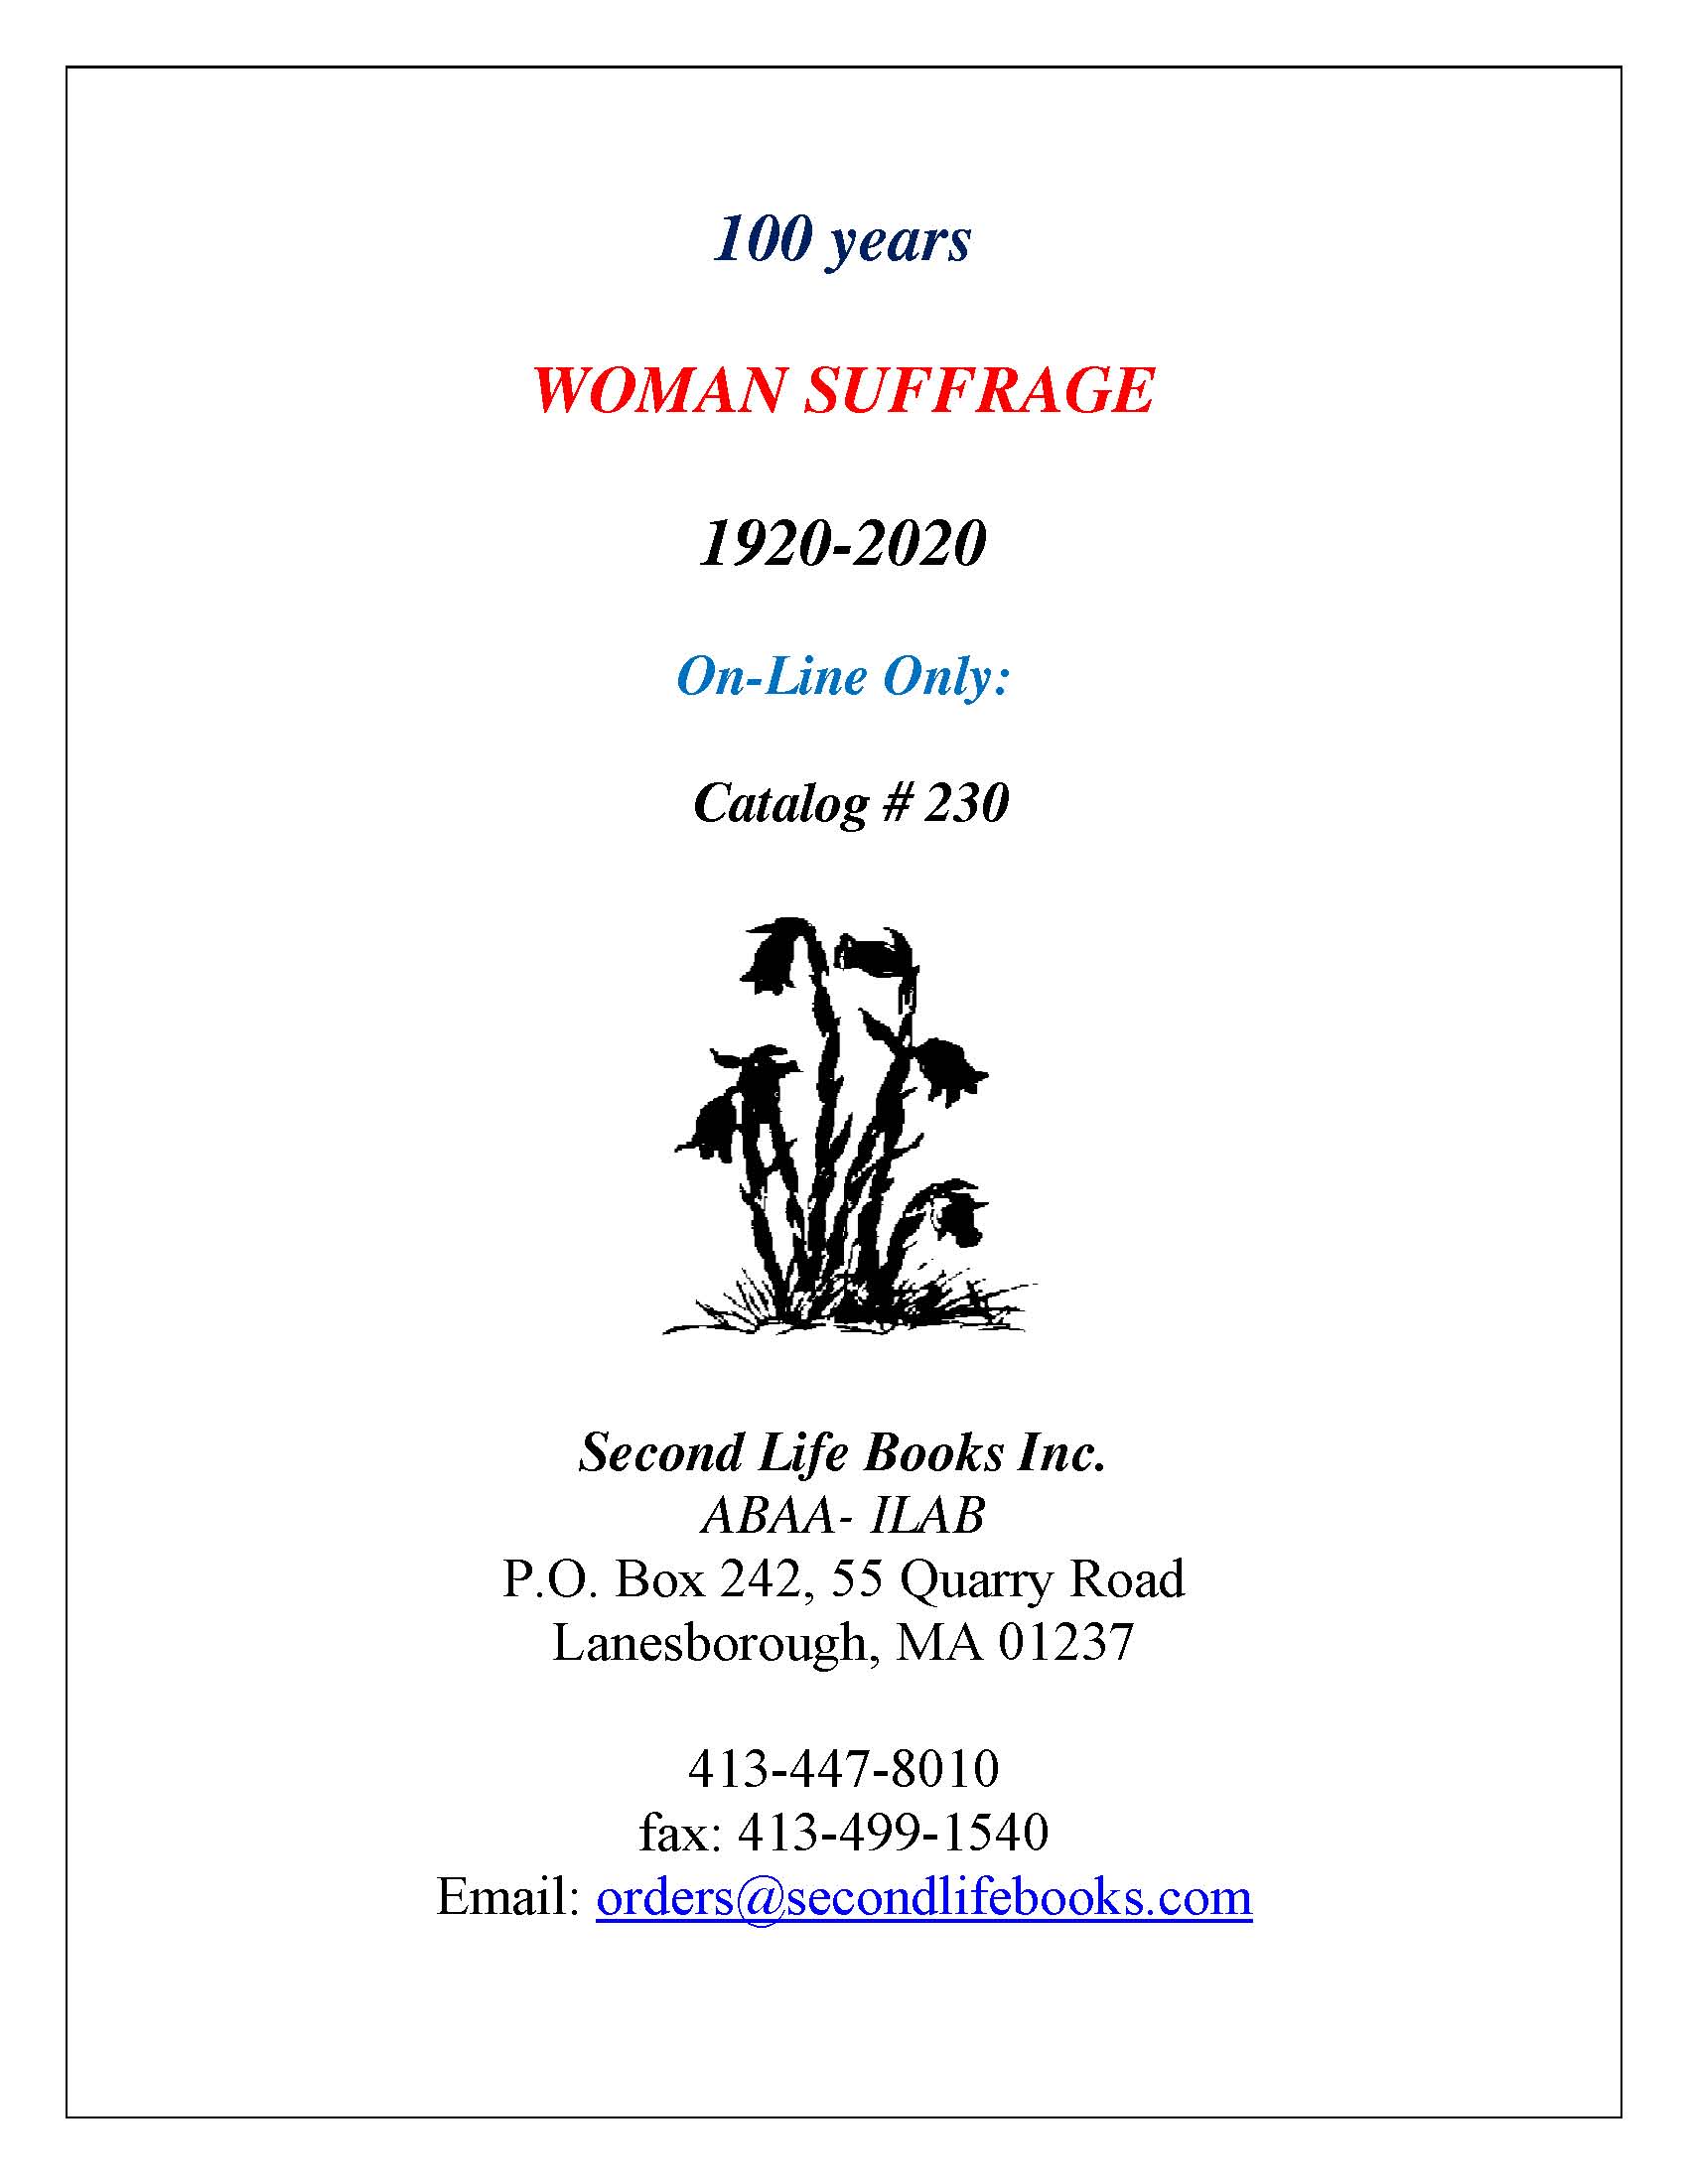 Woman Suffrage: 1920-2020